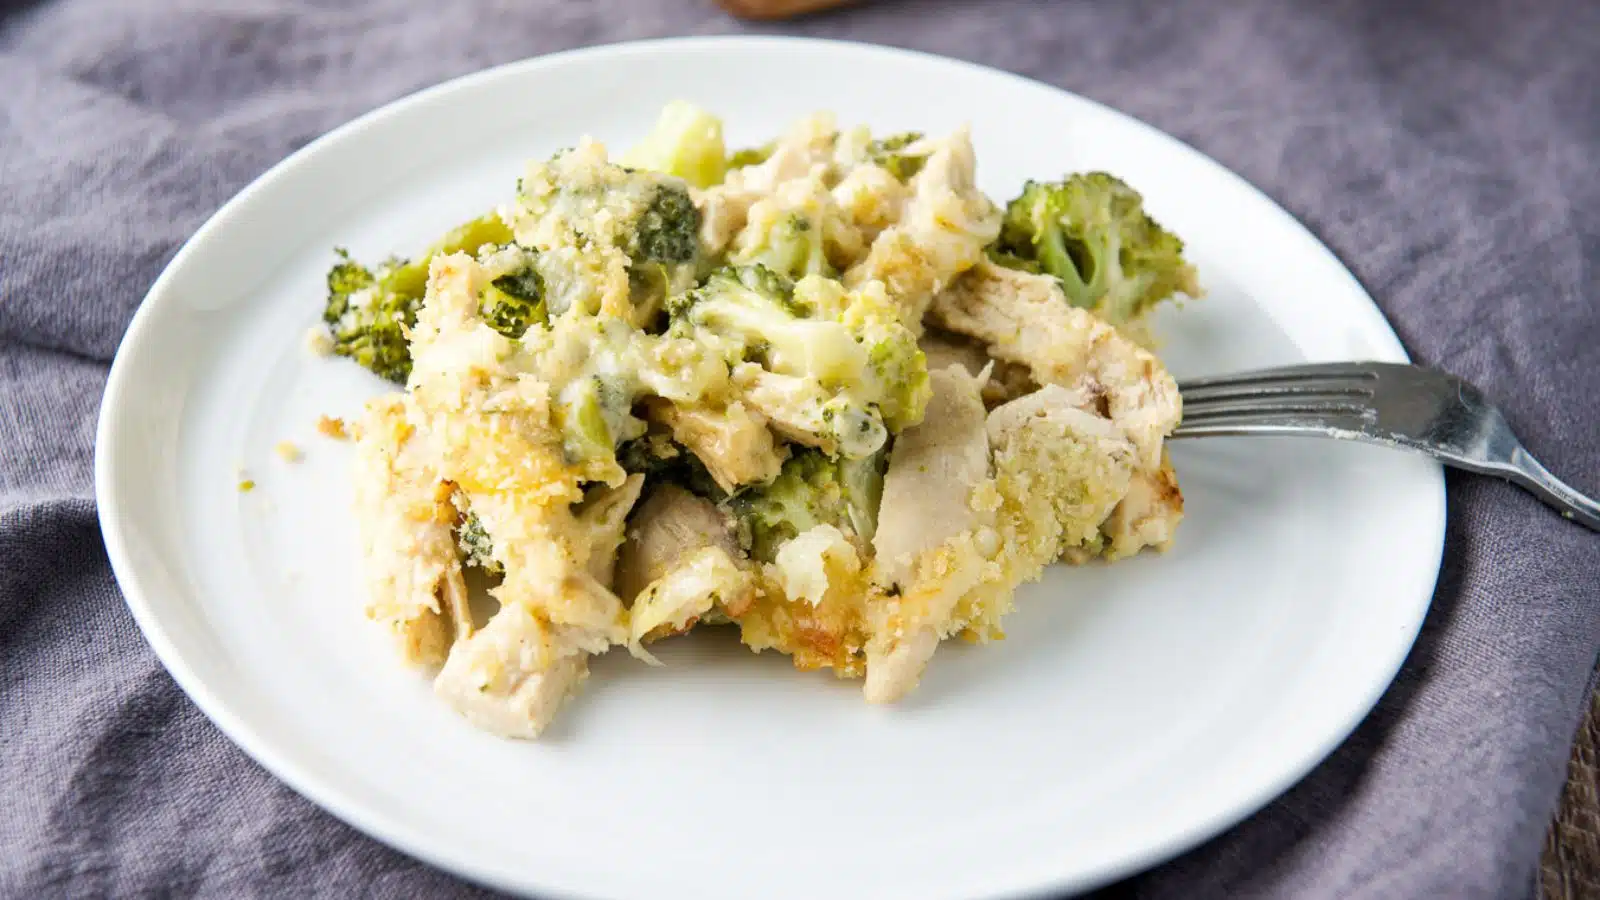 A small plate with the chicken, broccoli, and cheese ladled on it and a fork